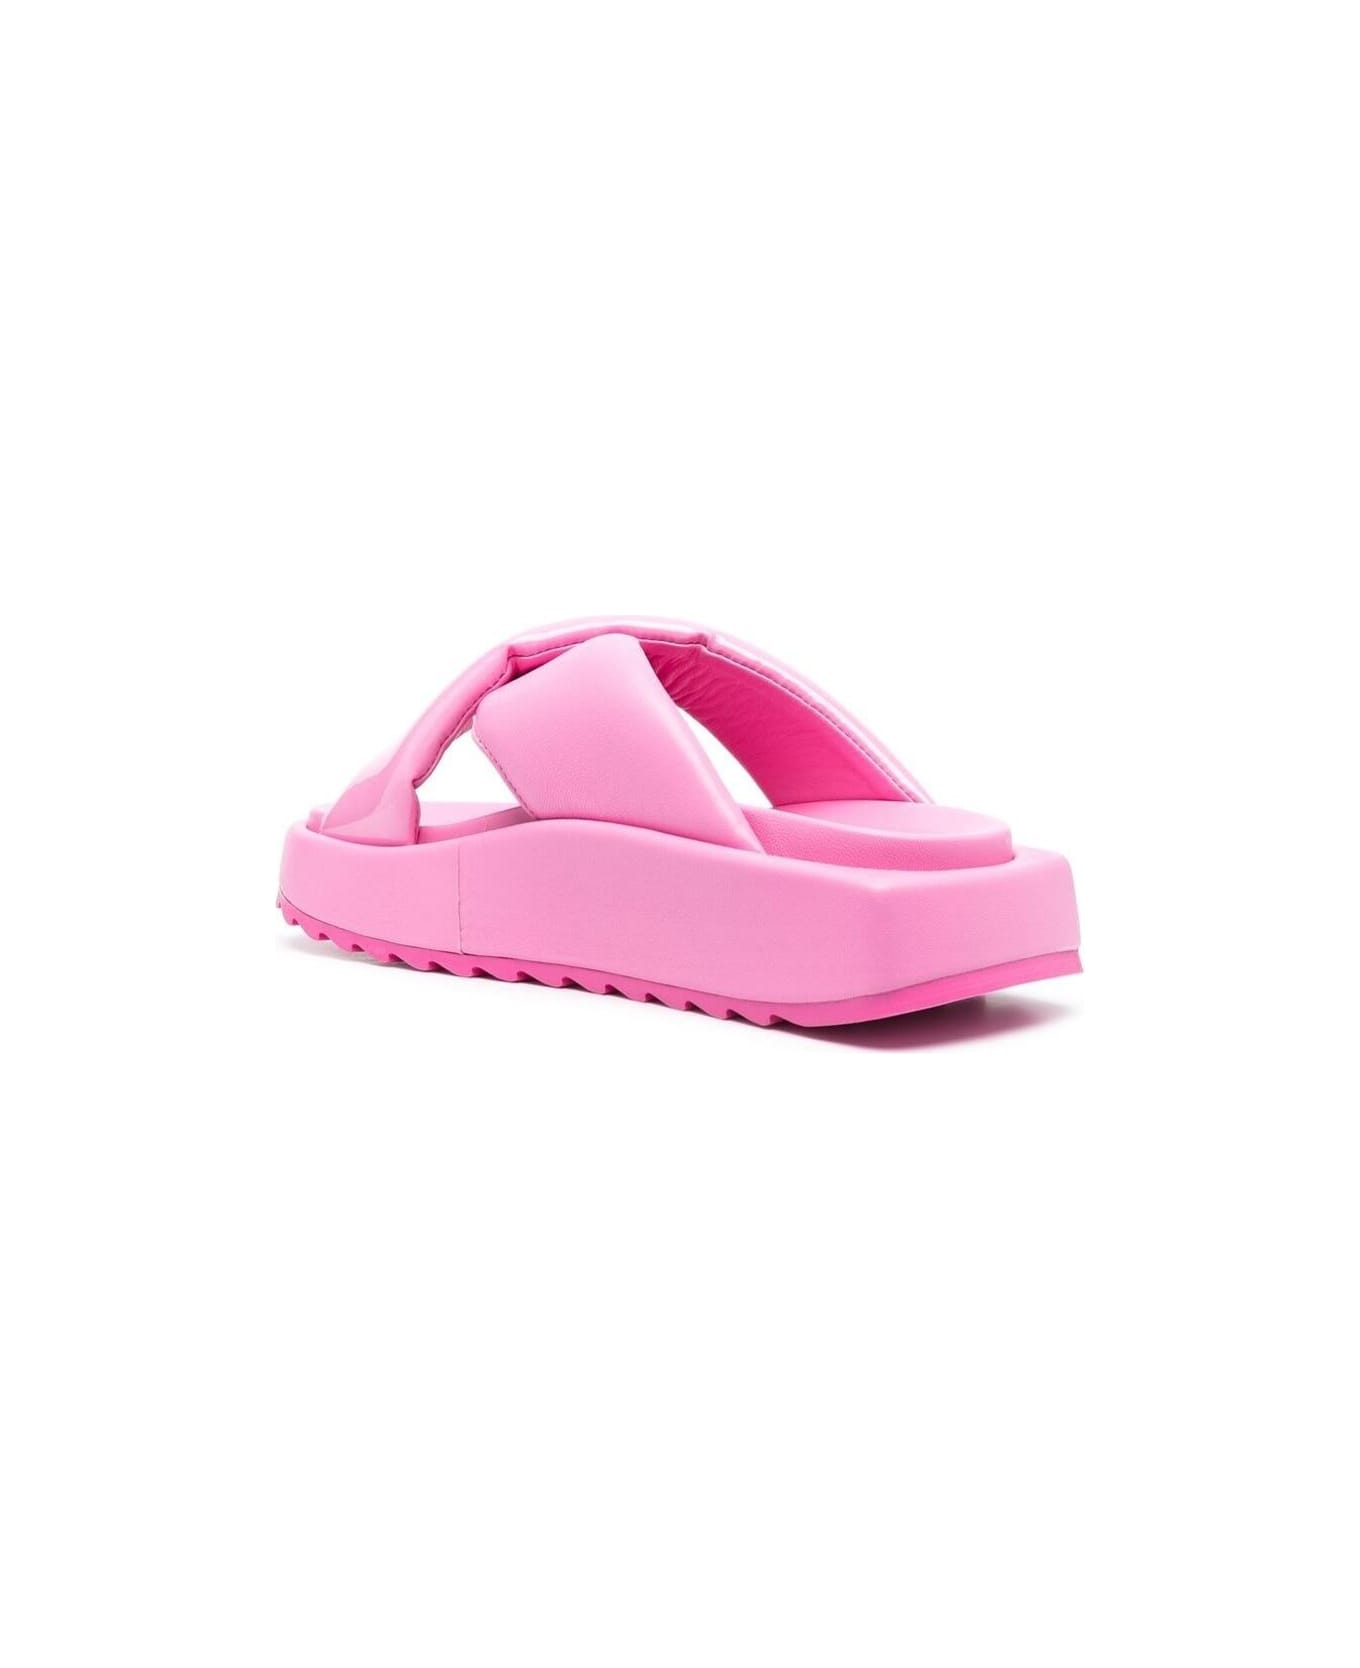 GIA BORGHINI Pink Crossover Strap Slides Glossy Finish In Leather Woman - Pink